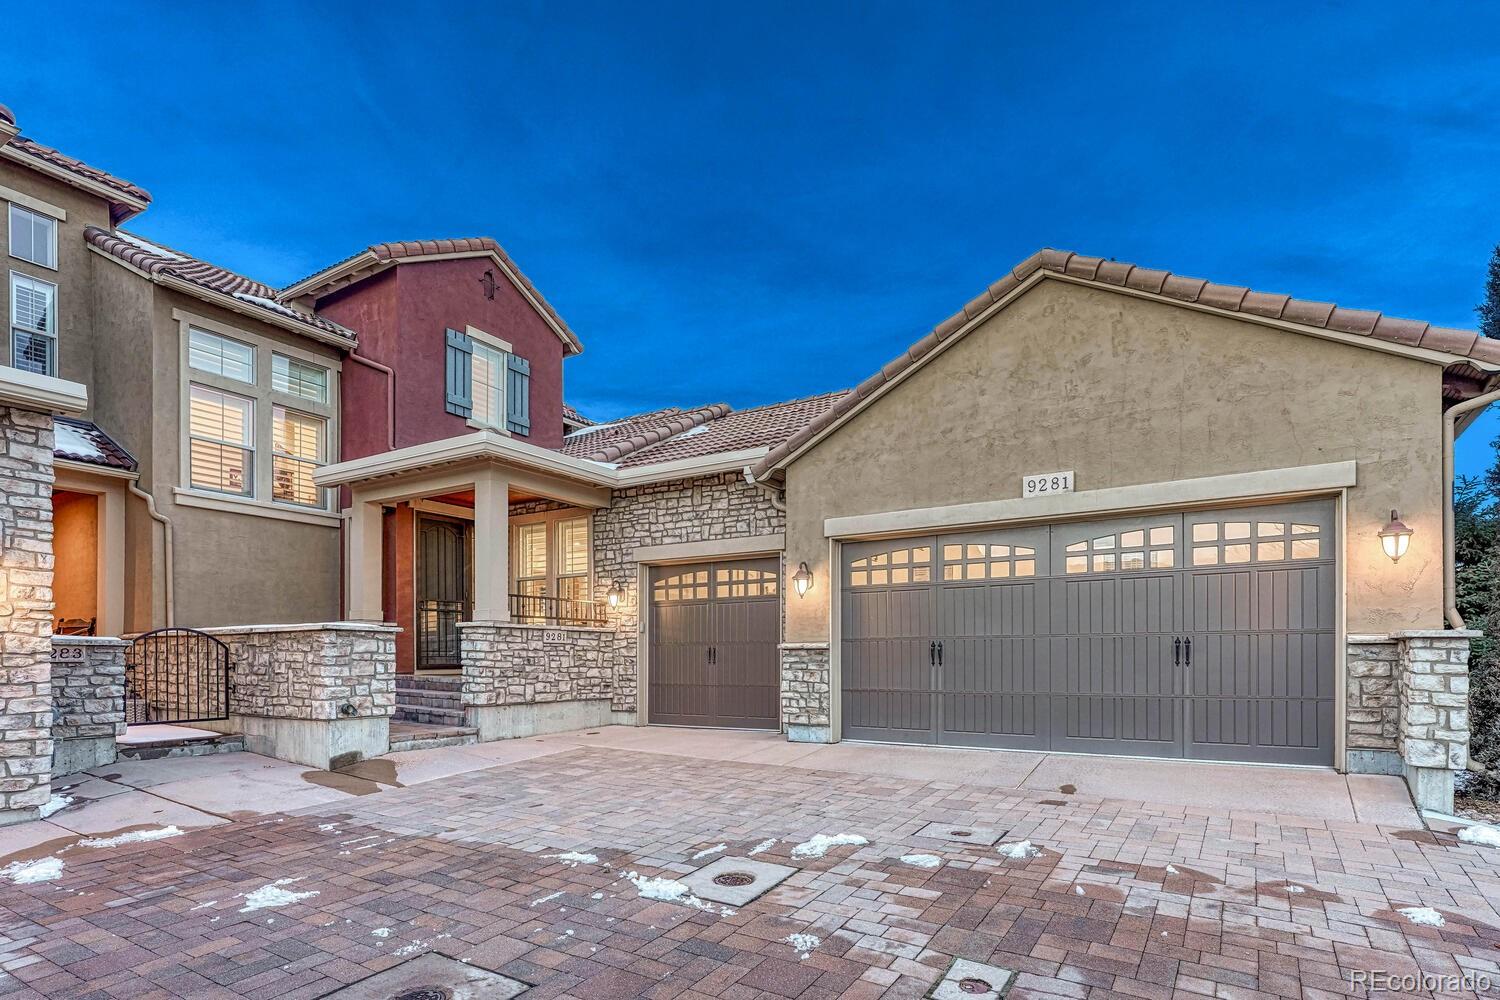 9281  viaggio way, highlands ranch sold home. Closed on 2024-02-21 for $1,400,000.